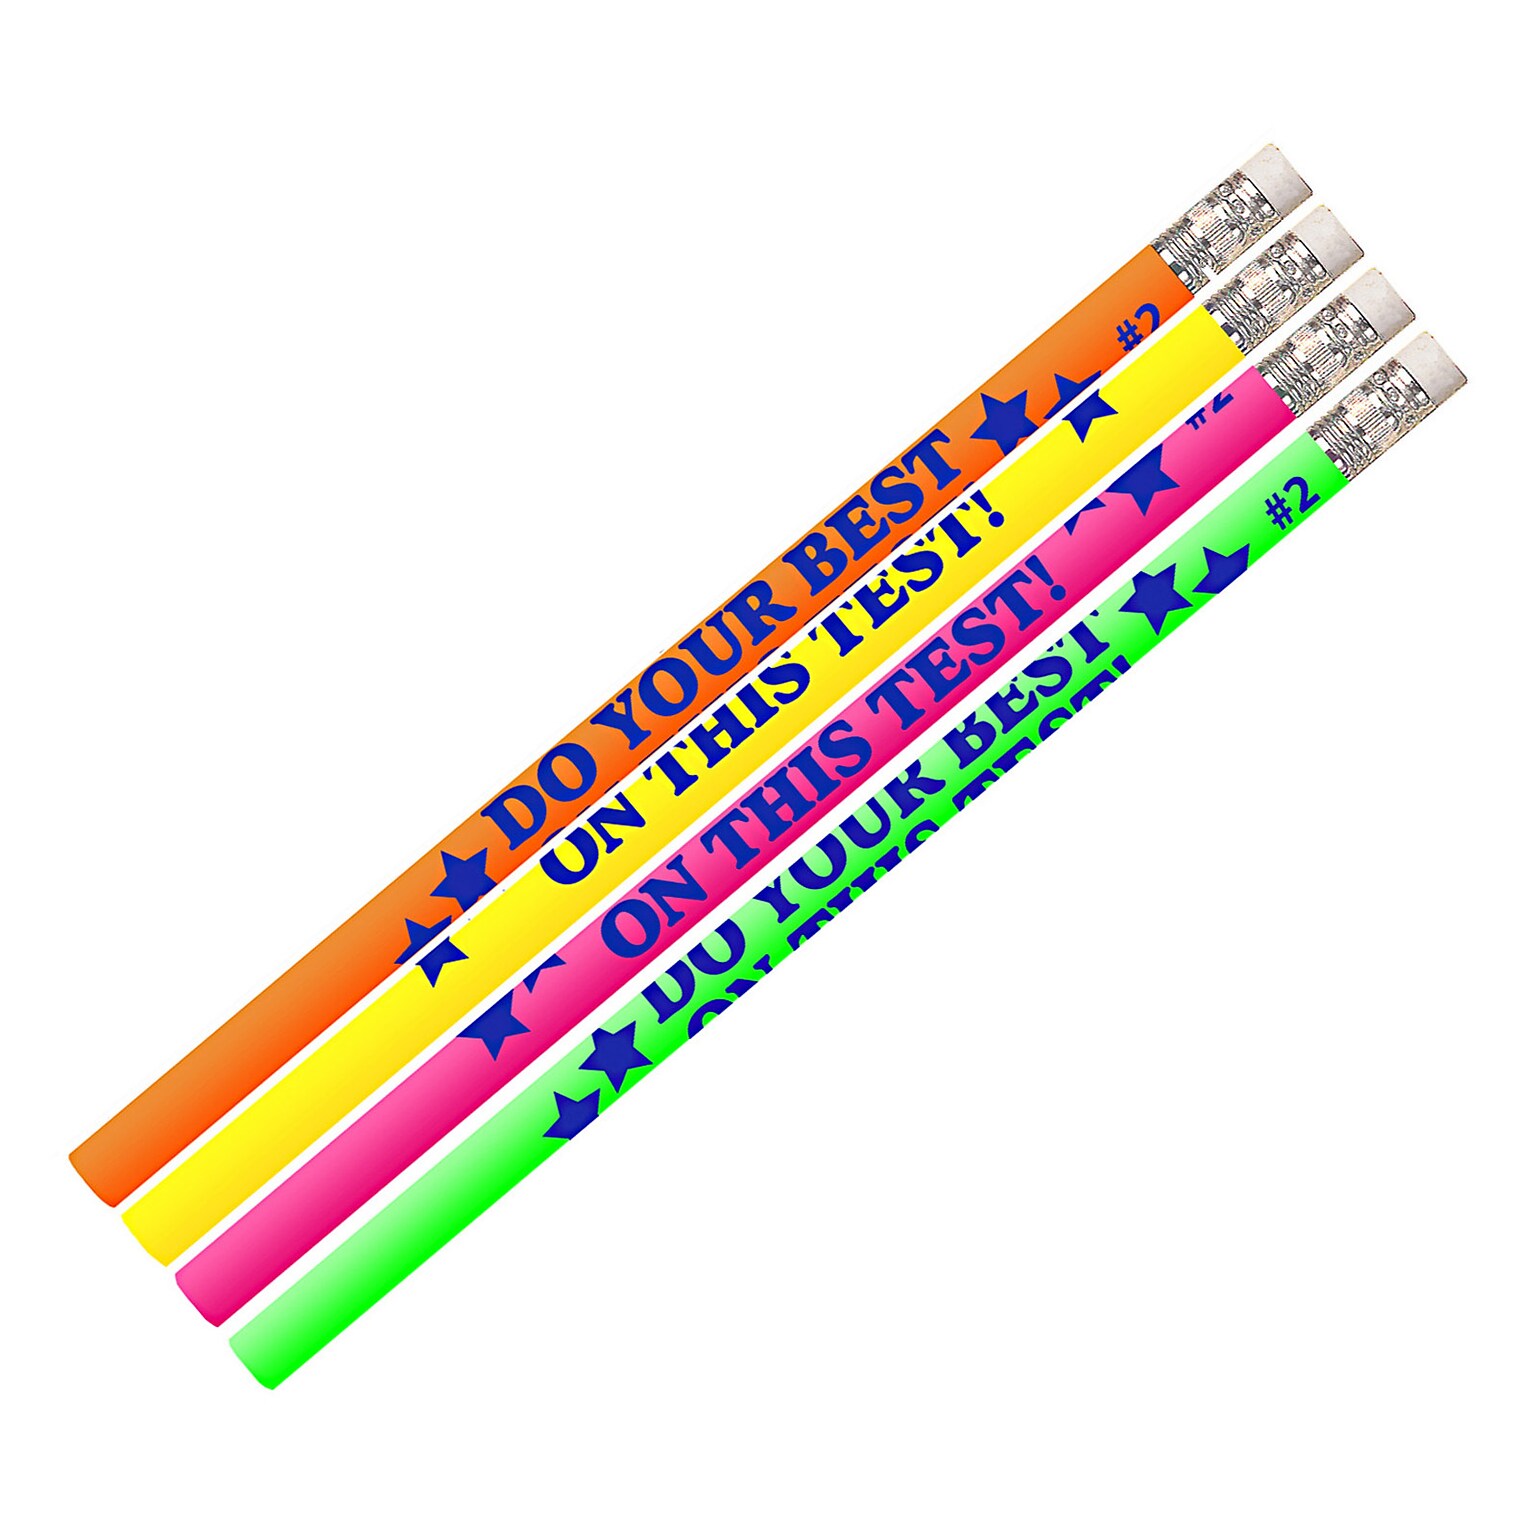 Musgrave Pencil Company Do Your Best On The Test Motivational Pencils, 12/Pack, 12 Packs (MUS2495D-12)